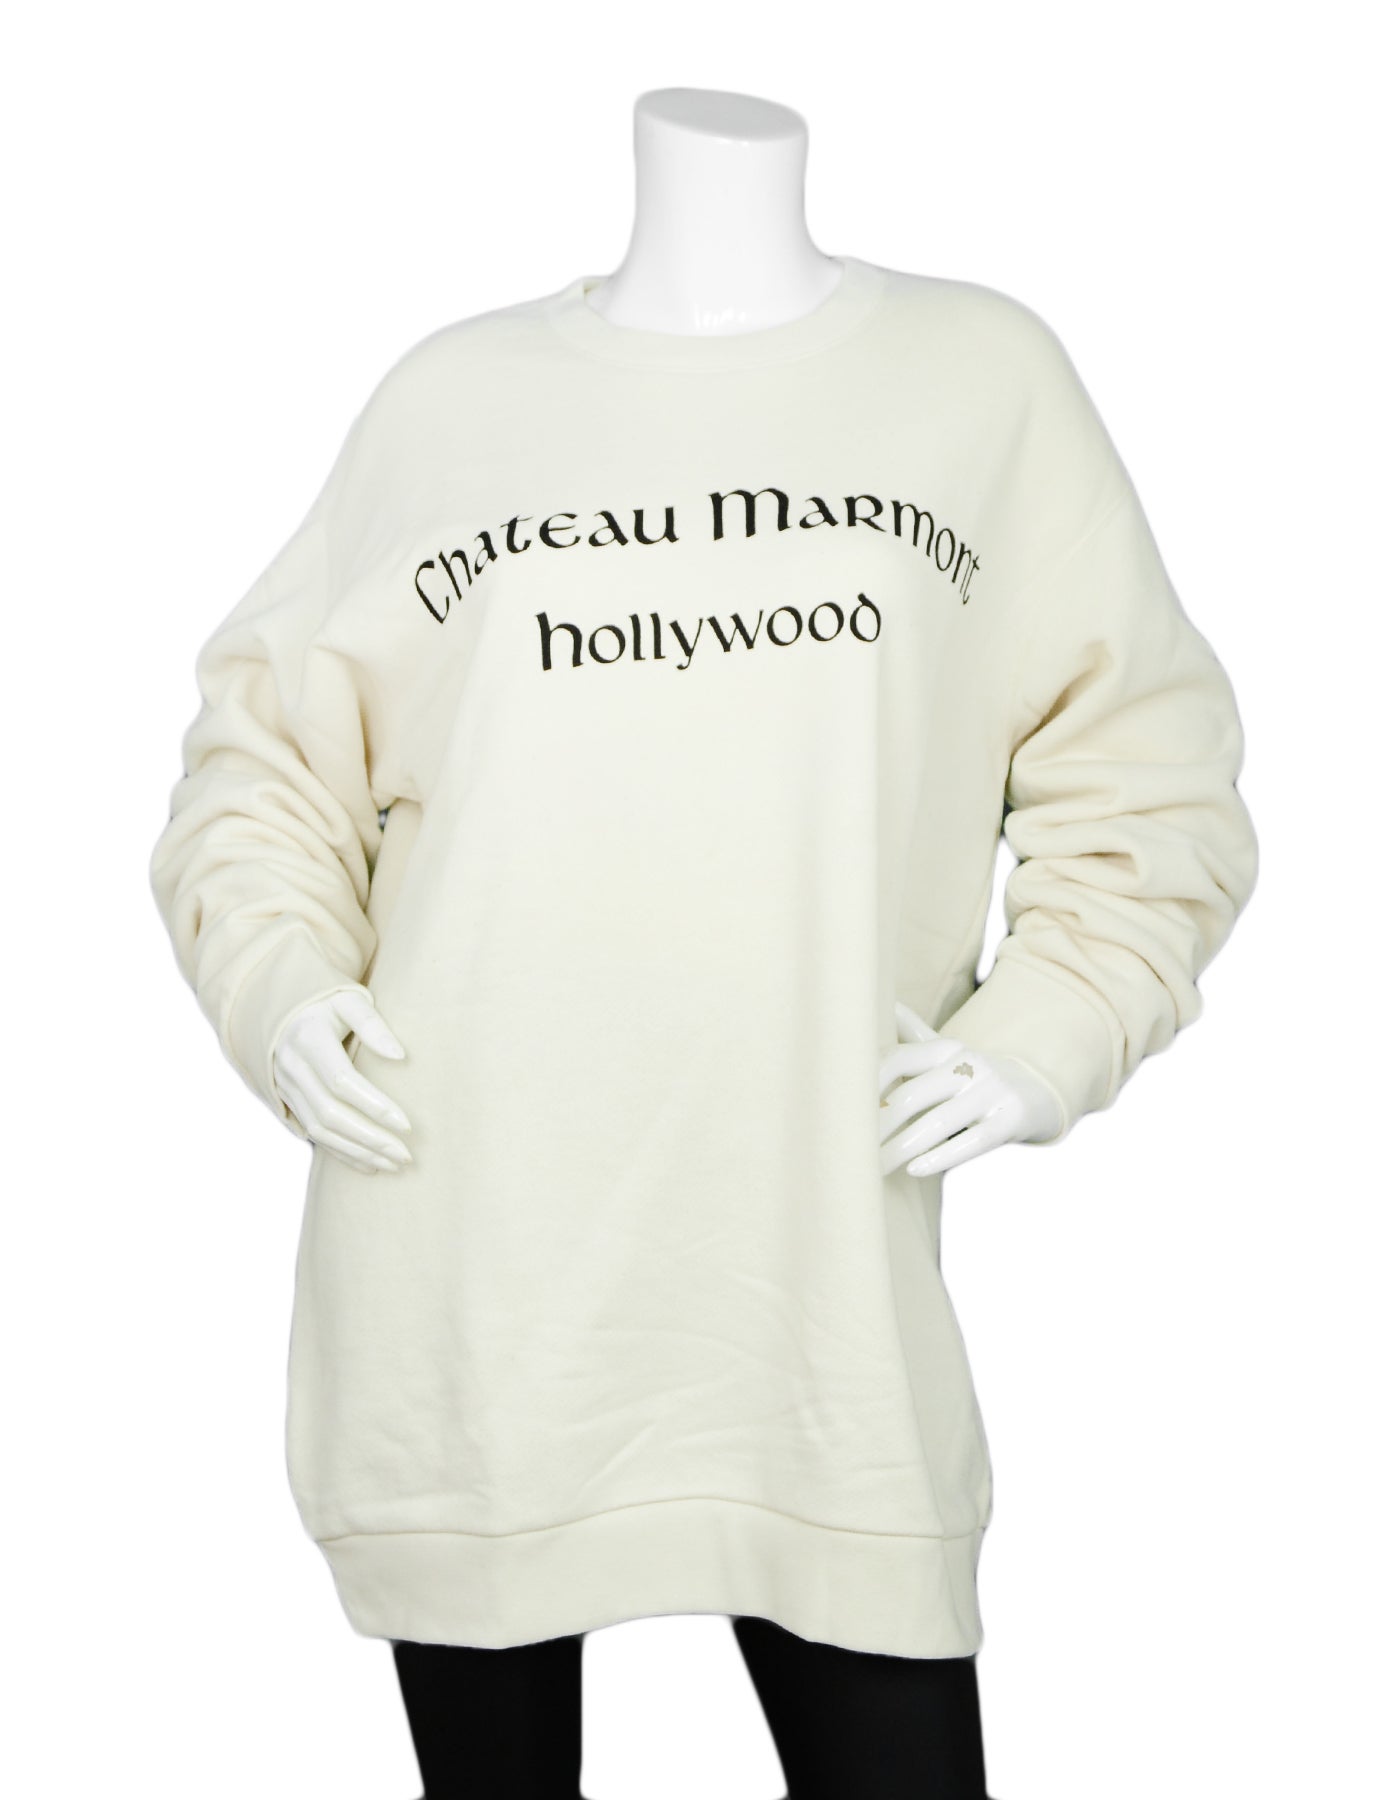 chateau marmont hoodie off white